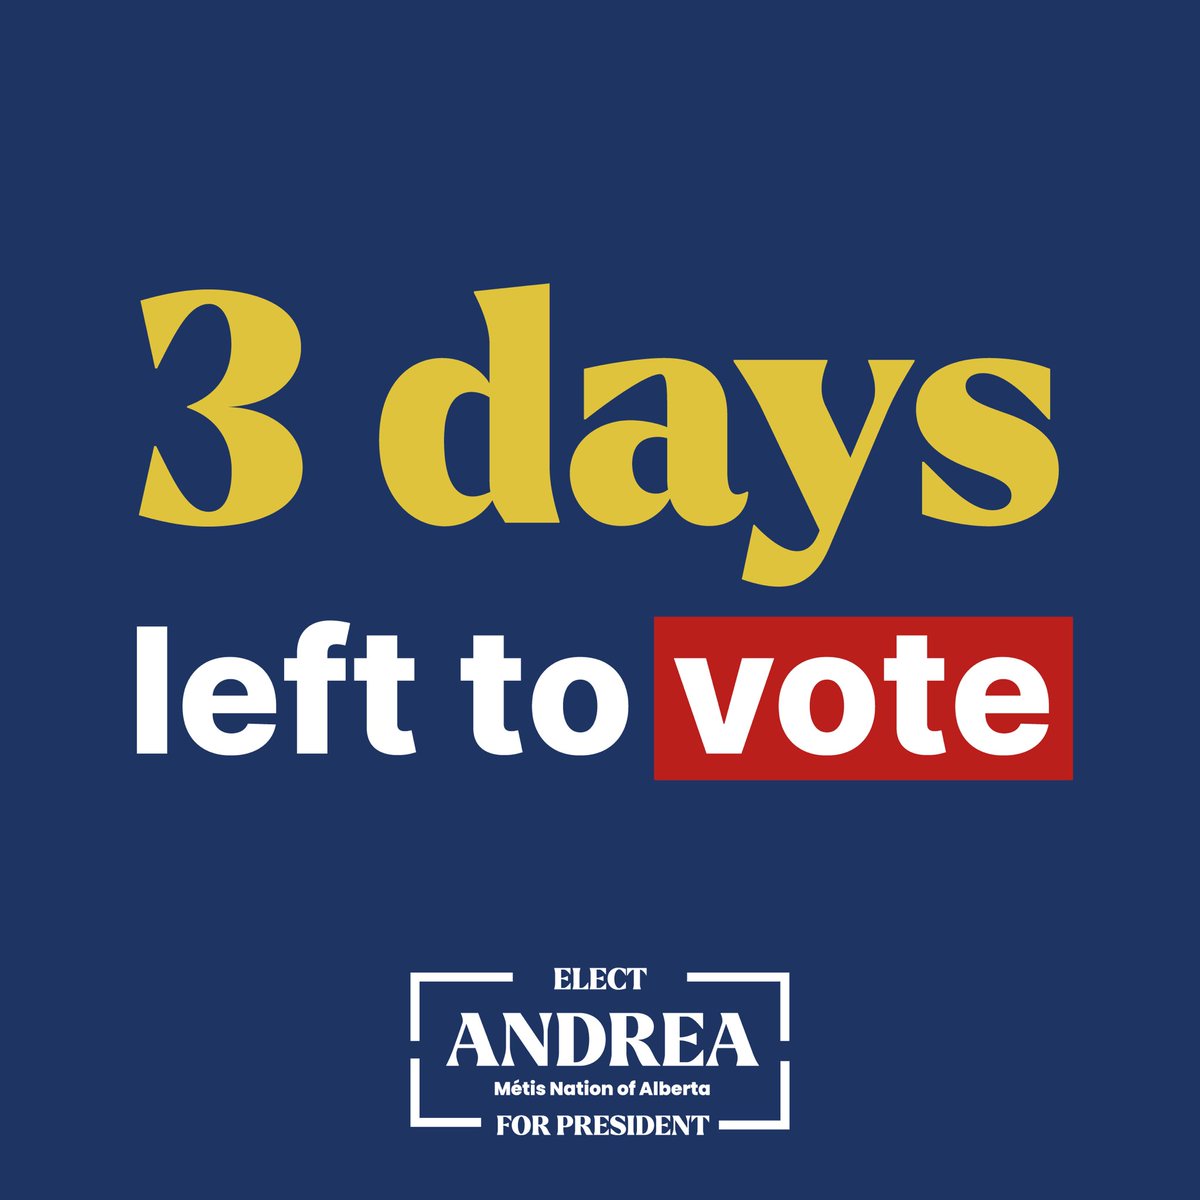 This election is an historic moment in our Nation’s history. If you haven’t voted yet, you have 3 days left!   Vote to move our Nation forward. Vote for me, Andrea Sandmaier.   Learn where and how to vote by visiting metiselectionsab.com.